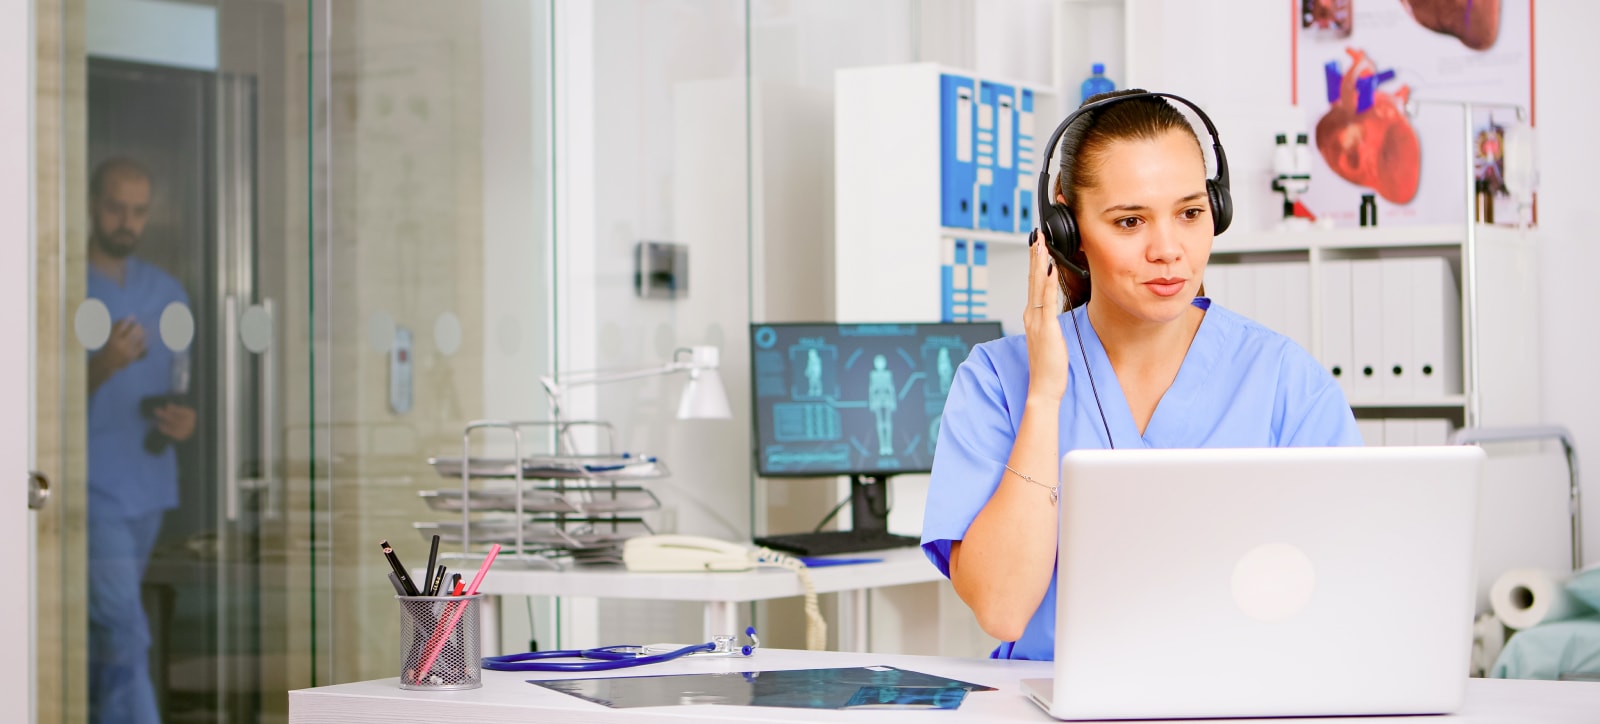 The Crucial Role of Technical Support in the Healthcare Industry